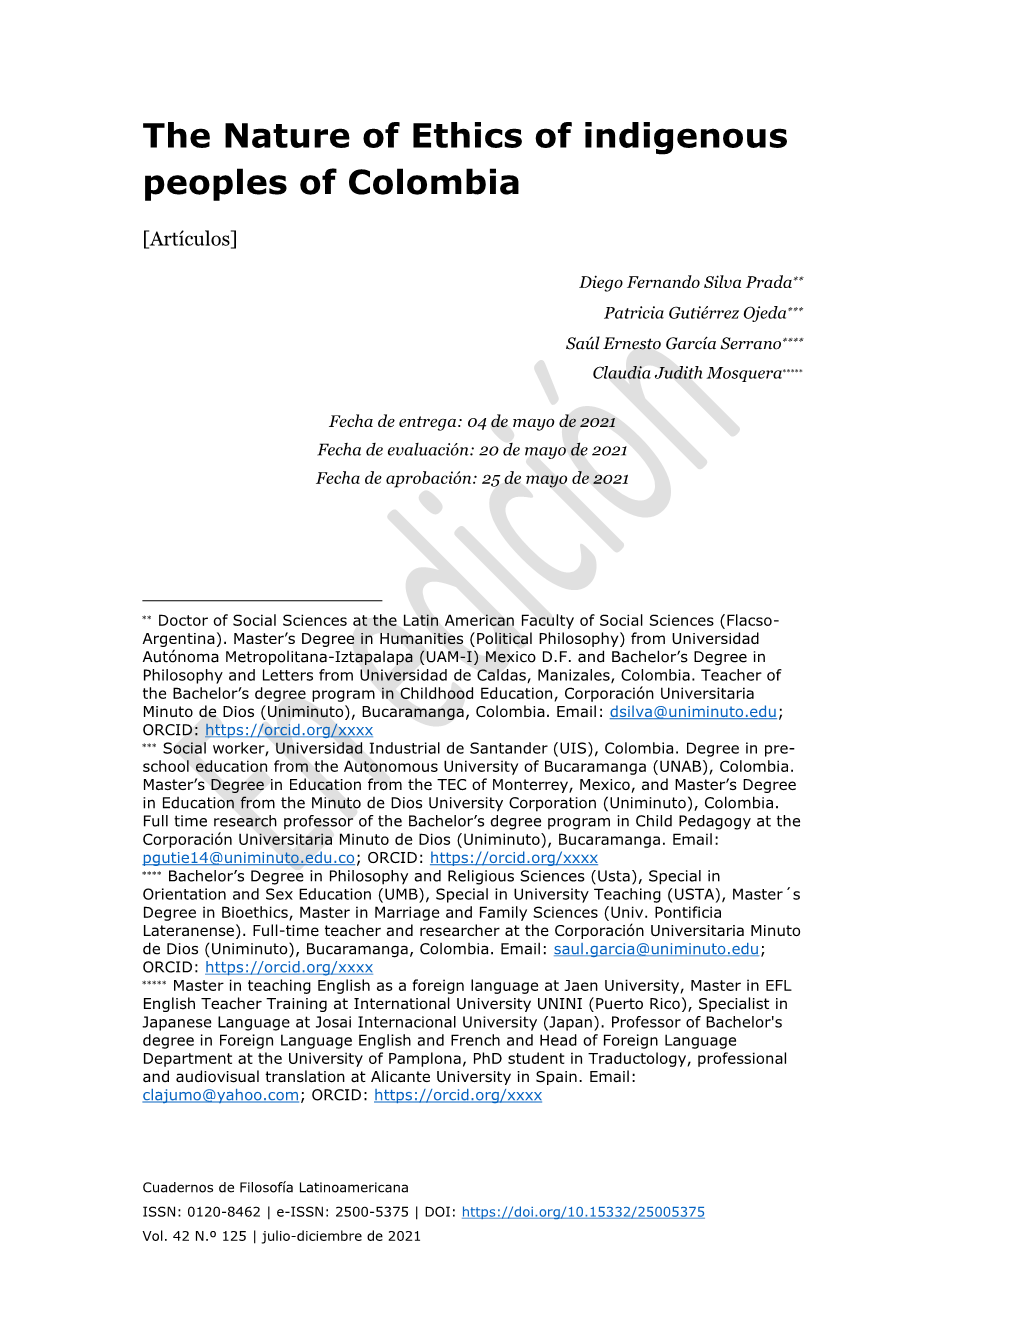 The Nature of Ethics of Indigenous Peoples of Colombia